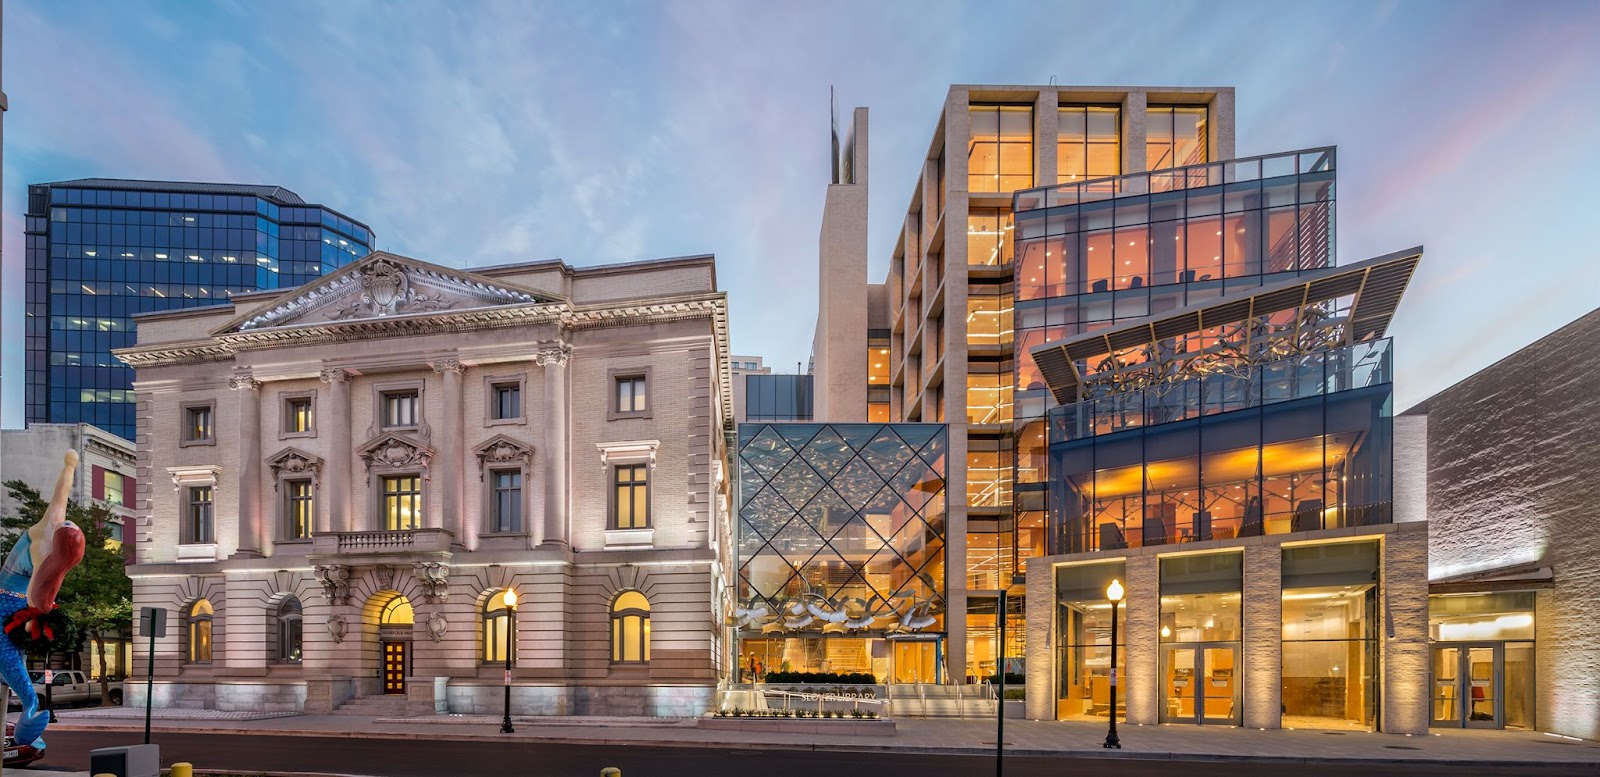 The renovated Slover Library (Peter Aaron Architectural Photography)